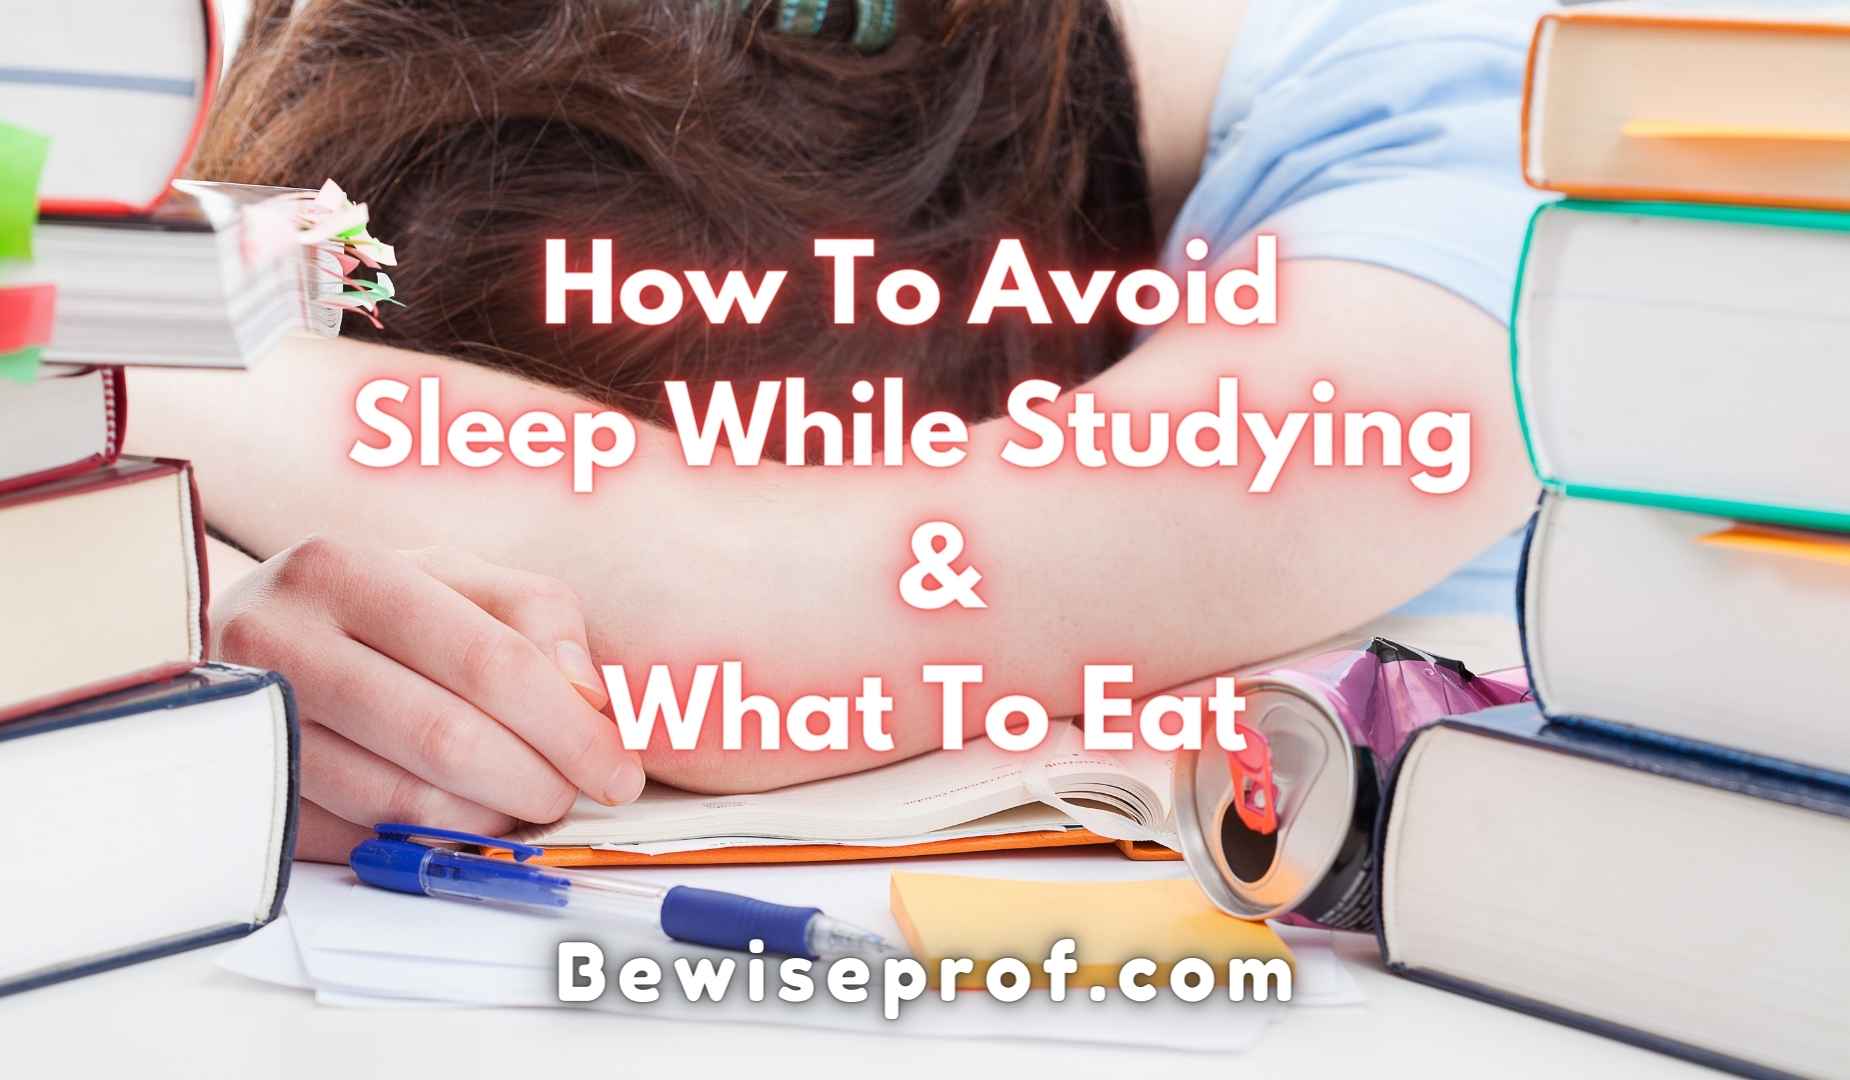 How To Avoid Sleep While Studying And What To Eat